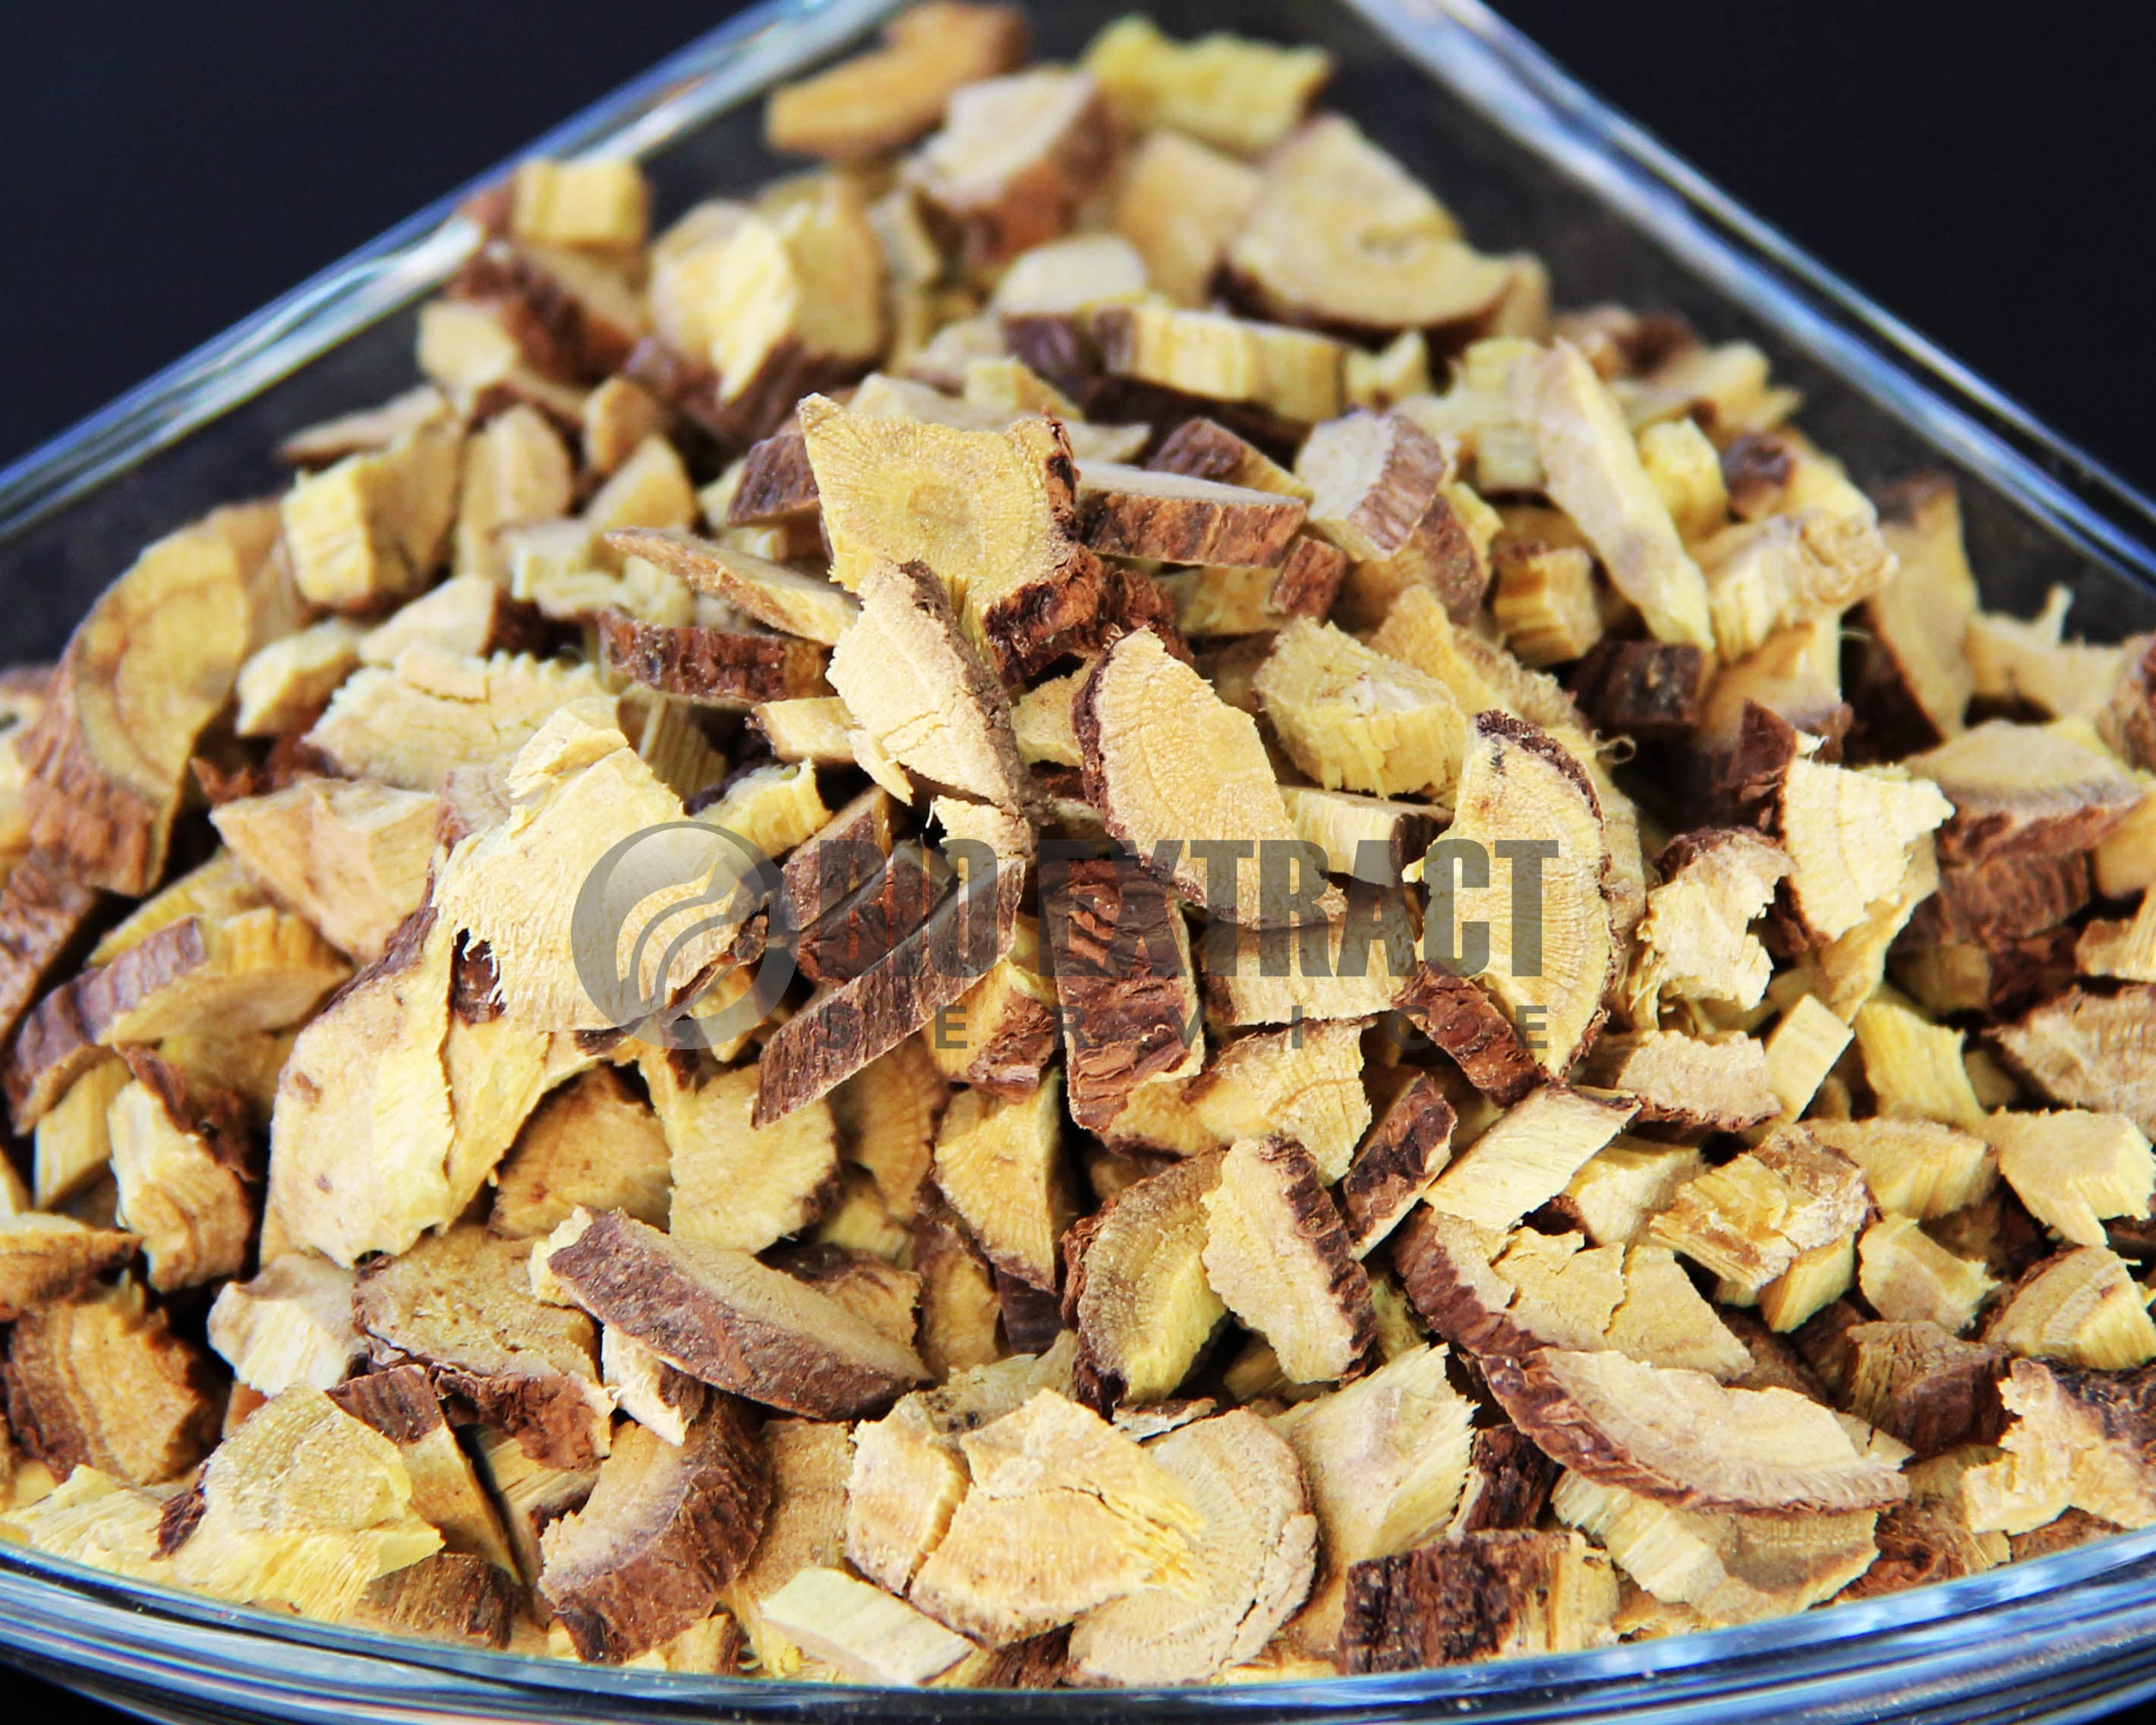 Licorice root crushed